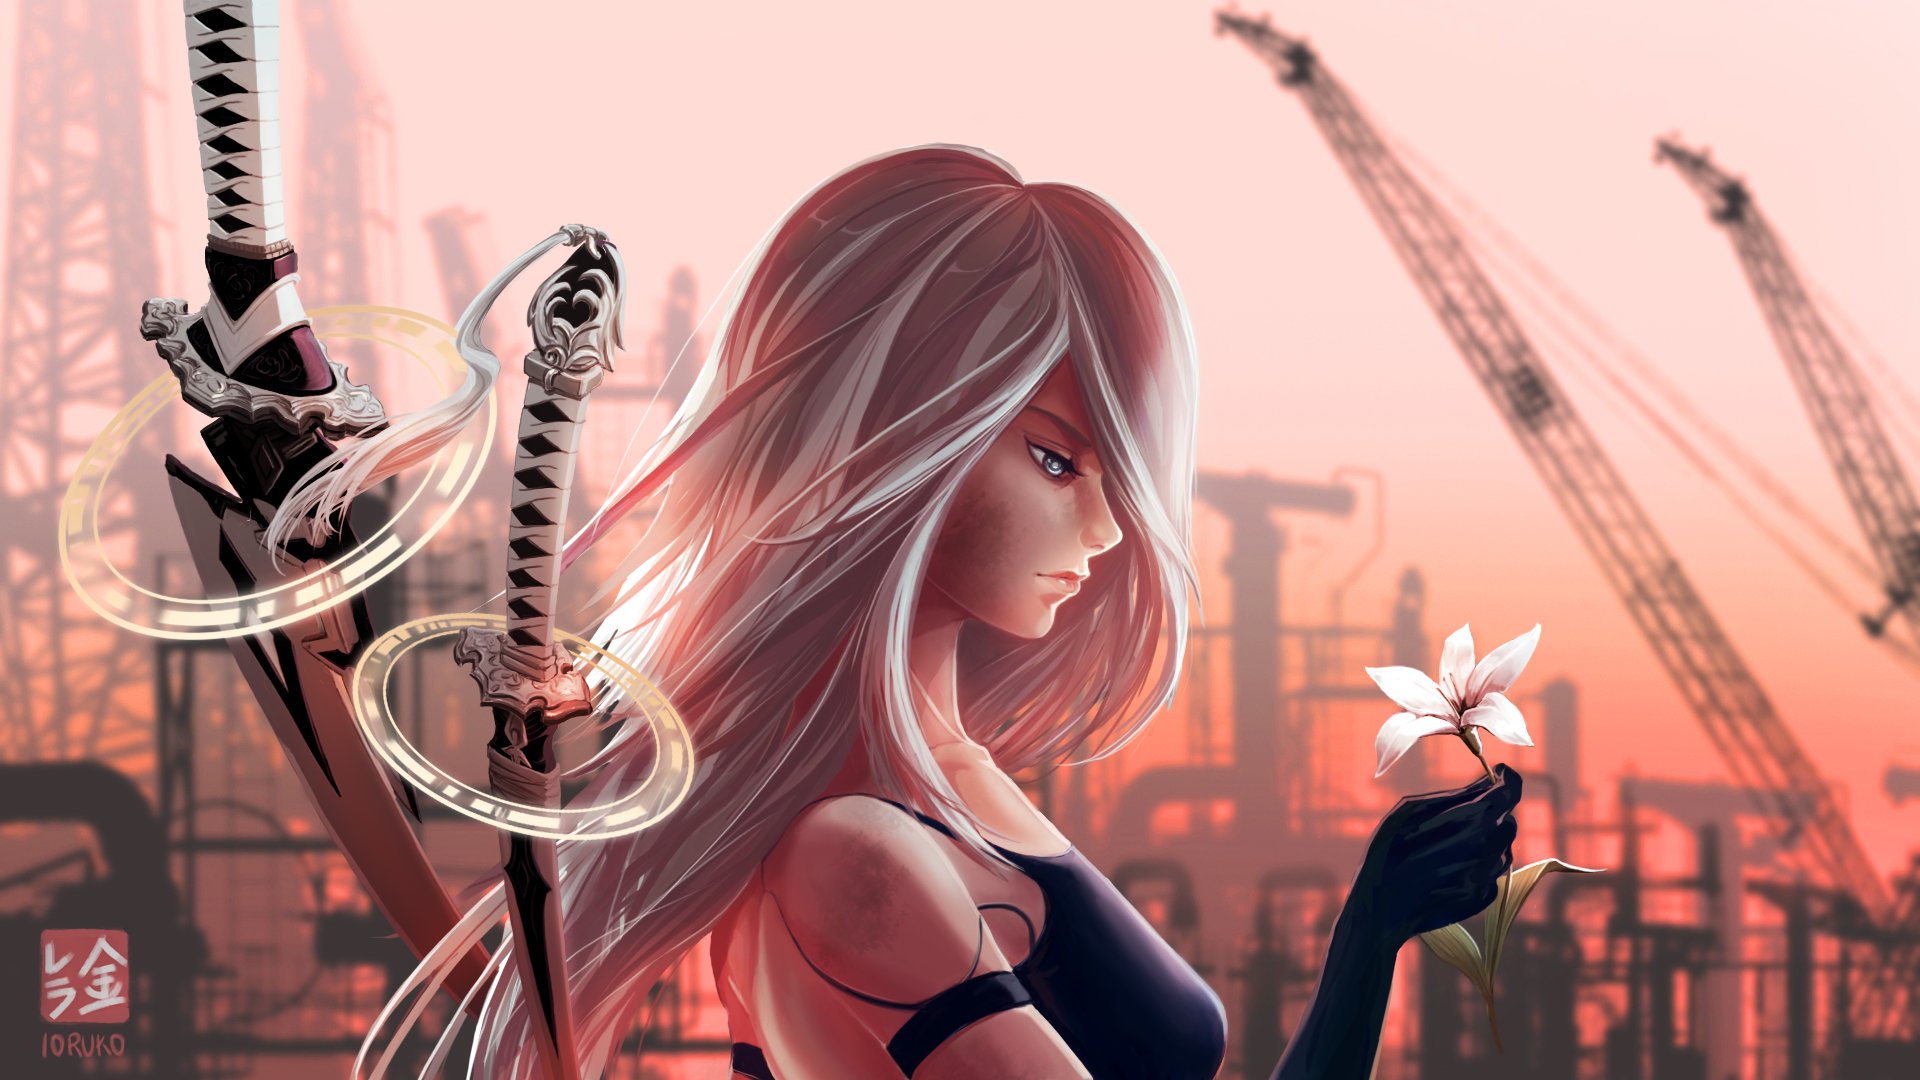 A2 (Nier: Automata), Digital art, Fan art, Video games, Nier: Automata, Gloves, NieR, Industrial city, Human android, Katana, Weapon, Fantasy weapon, Sadness, White flowers, Red sky Wallpaper